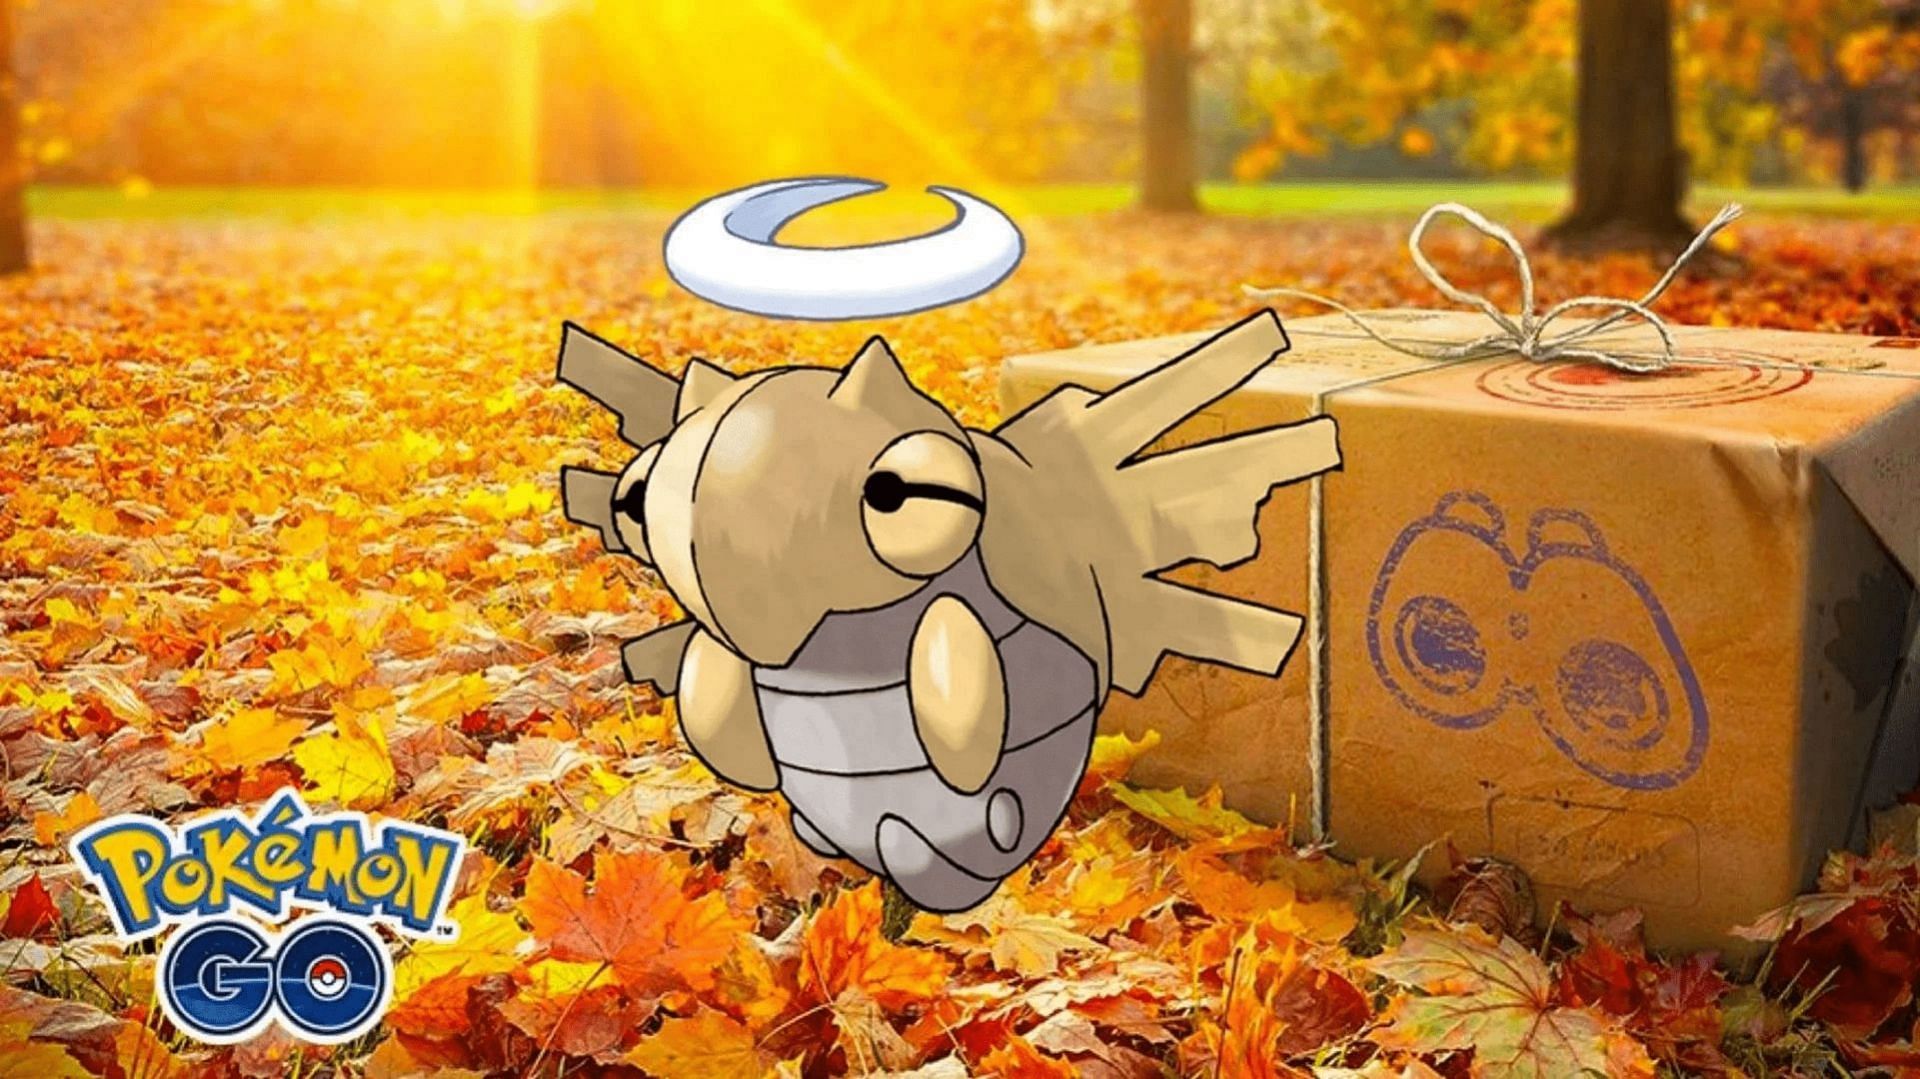 Shedinja is returning to Pokemon GO this October as a research reward (Image via Niantic)